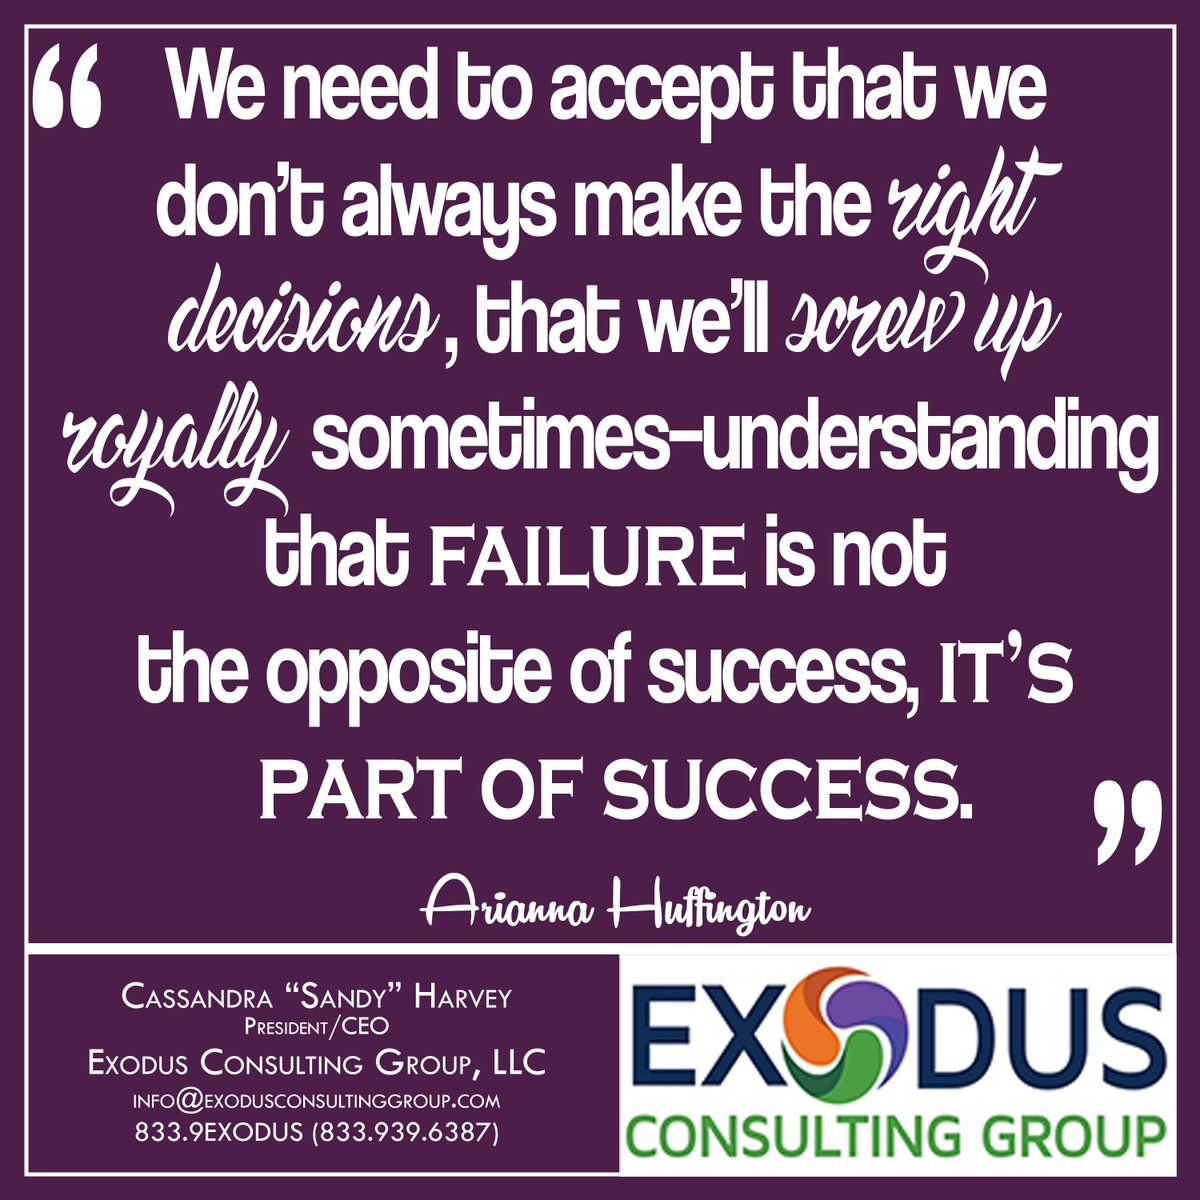 Success requires taking risks. To attempt to live life without making mistakes is uneventful and impossible. 

Lead in reality and with passion. If someone can’t own their mistakes do you really want to follow them?

#motivationalmonday
#fromfailuretosuccess
#theexodusway